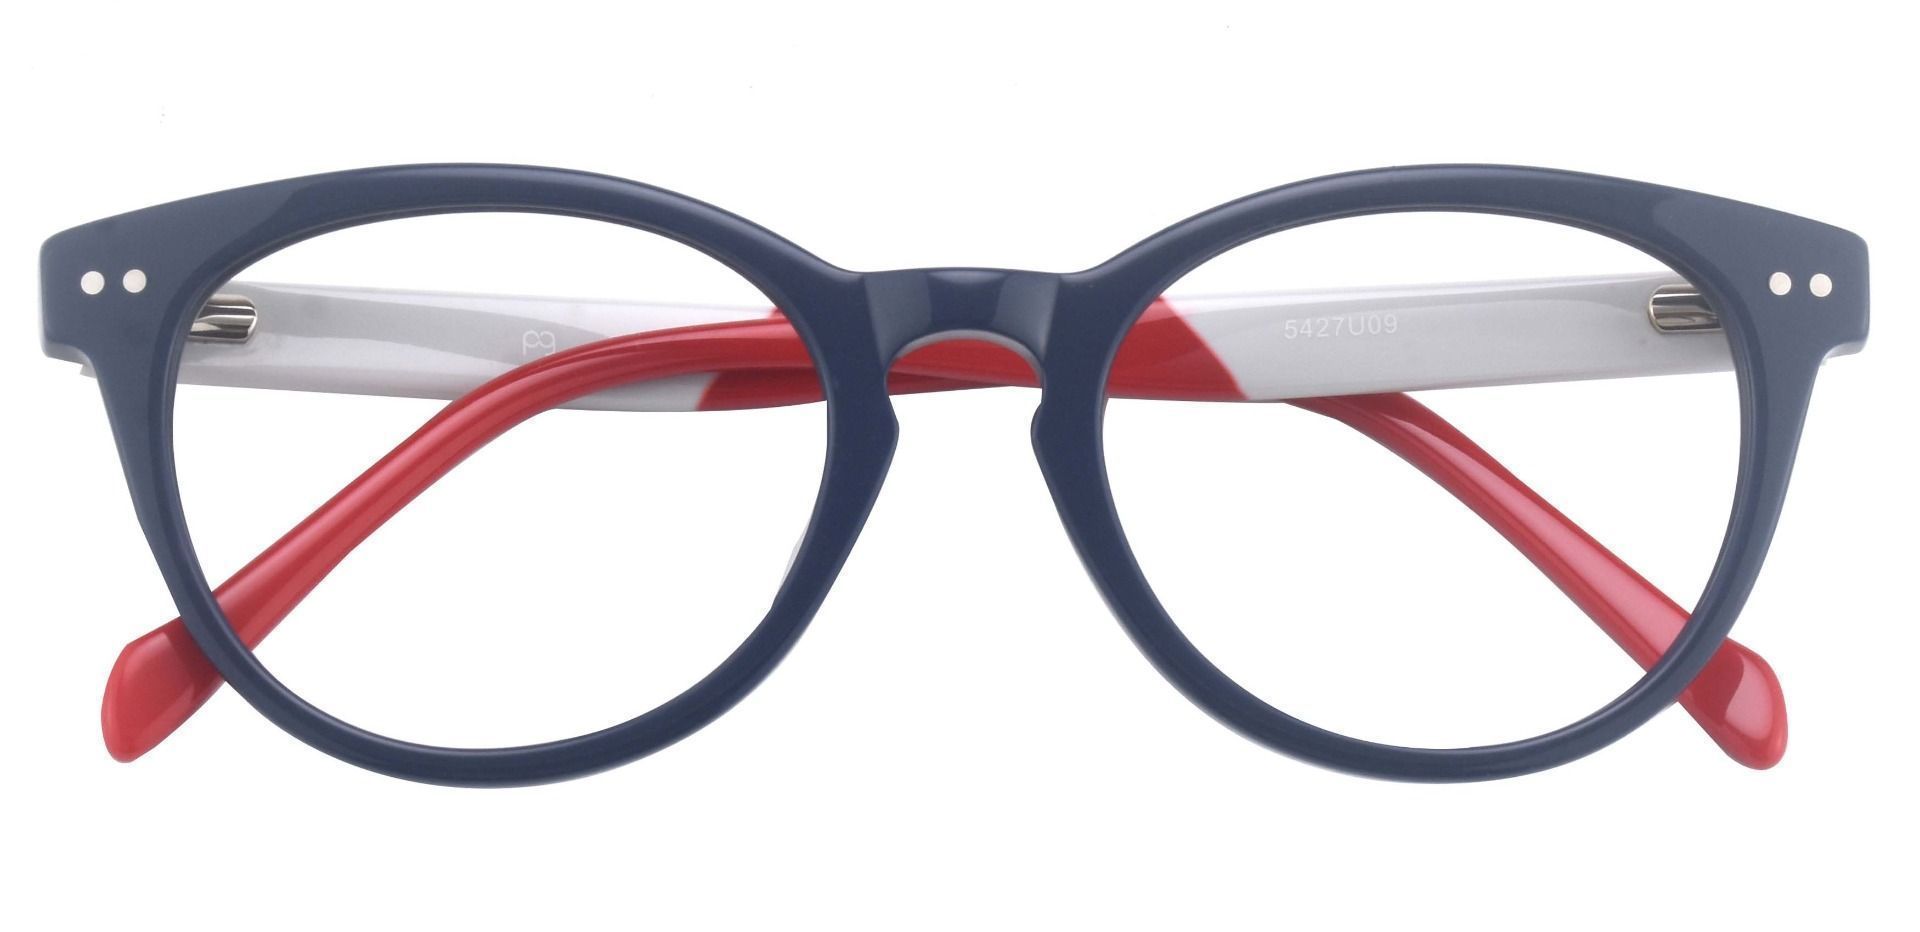 Revere Oval Reading Glasses - The Frame Is Blue And Red